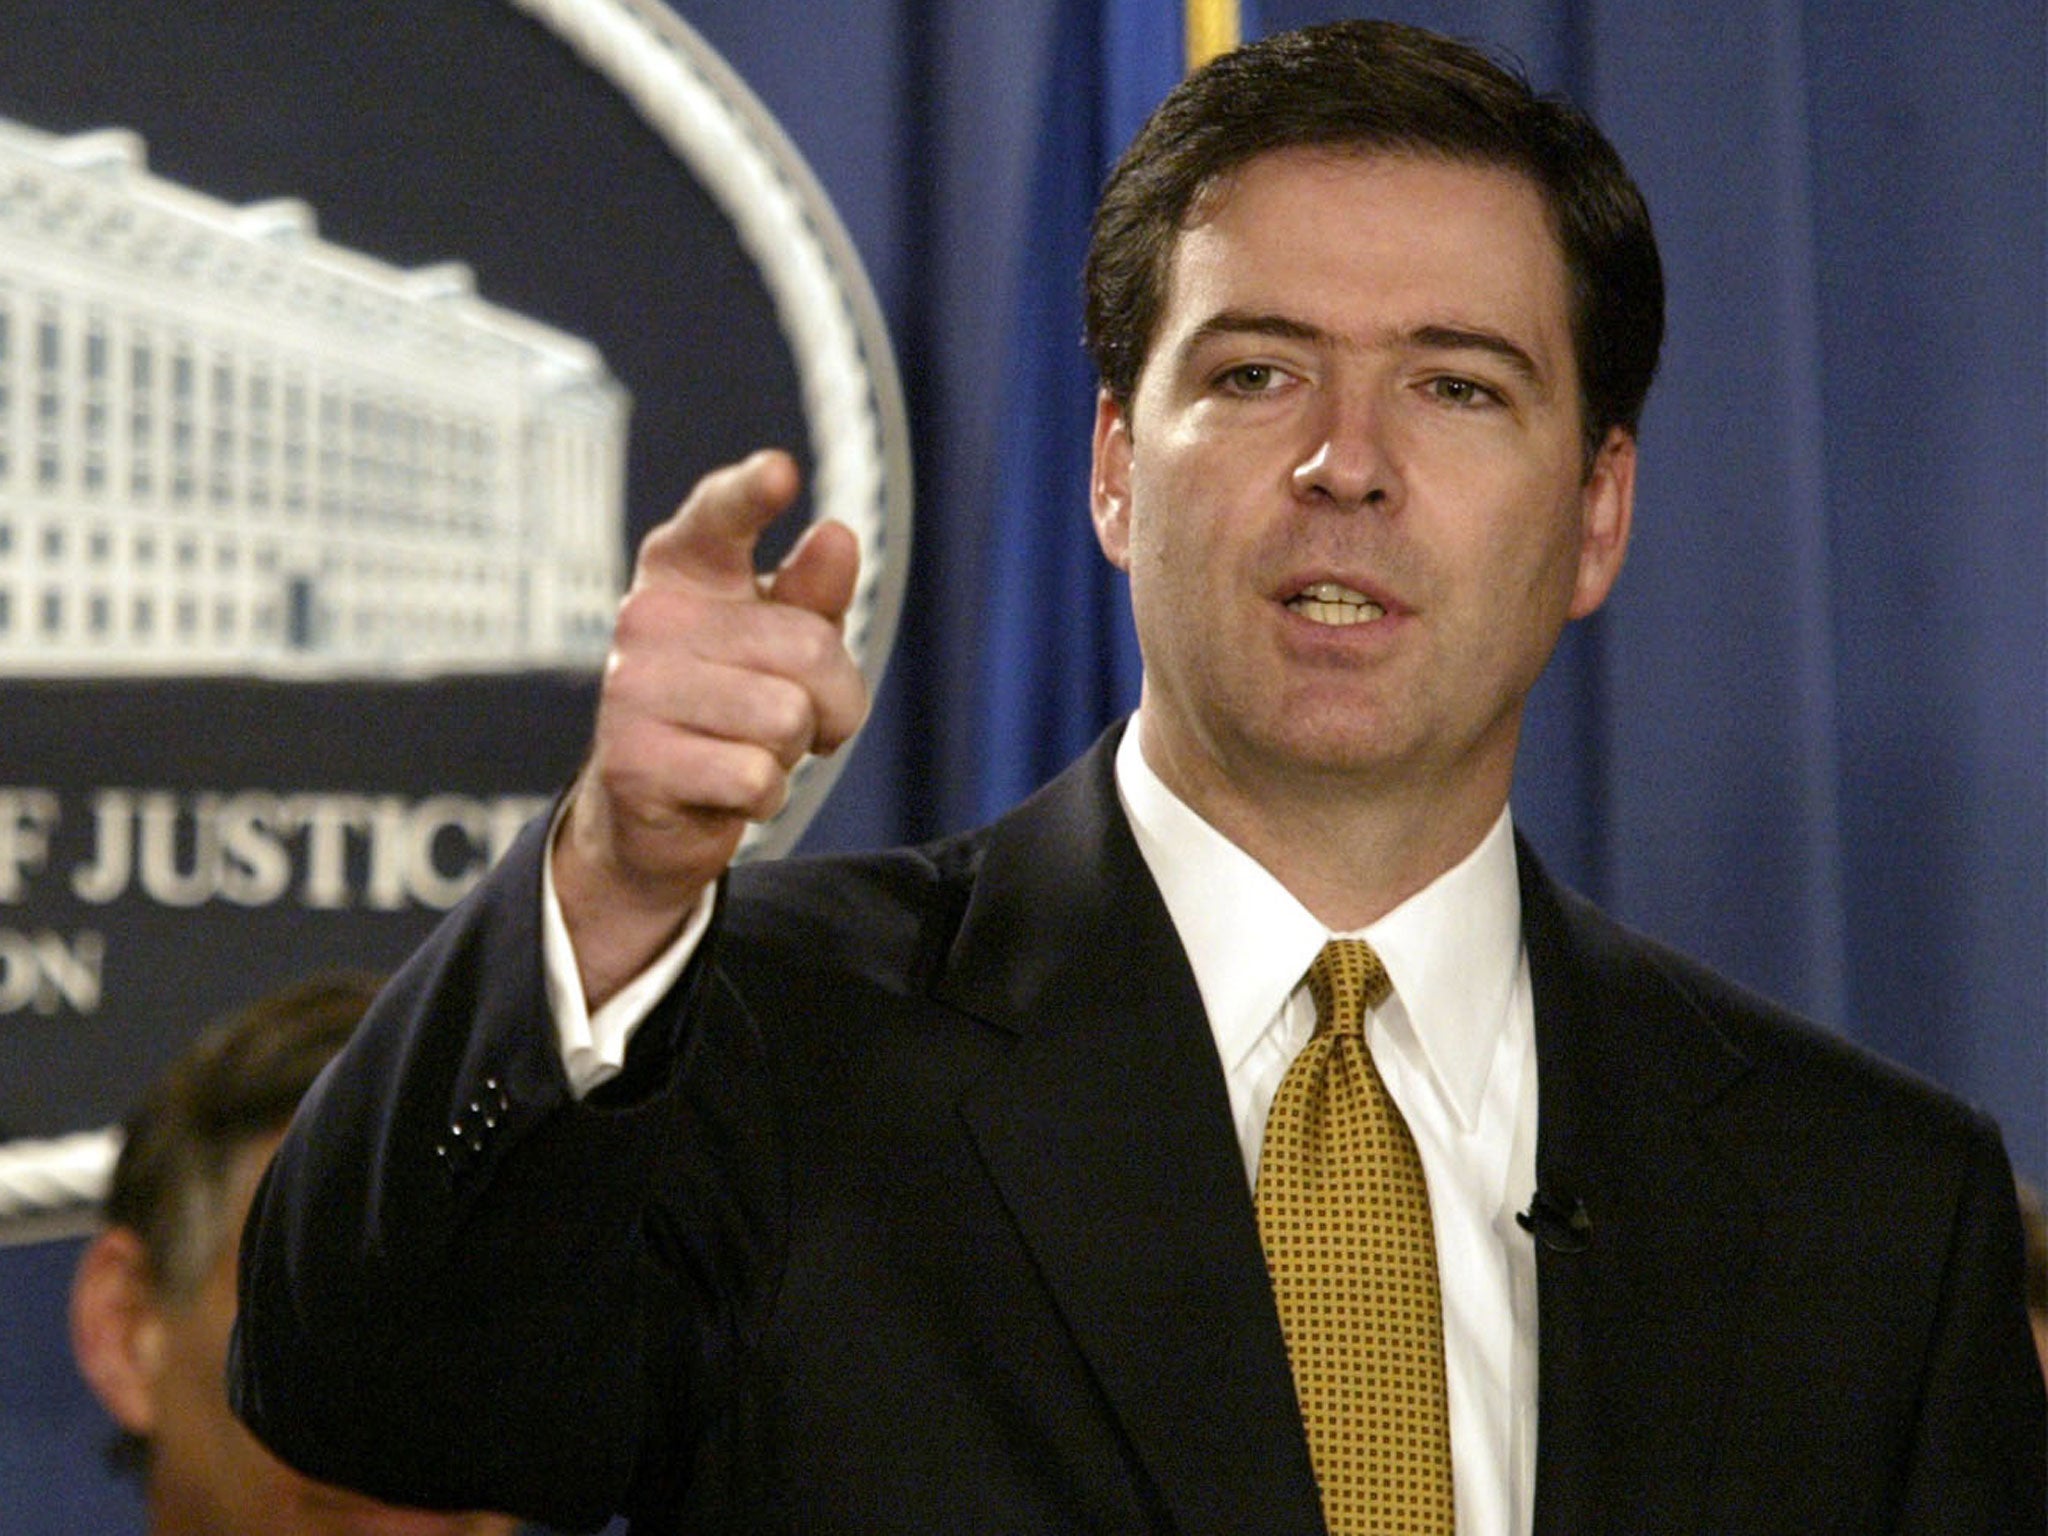 James Comey, the next director of the Federal Bureau of Investigation